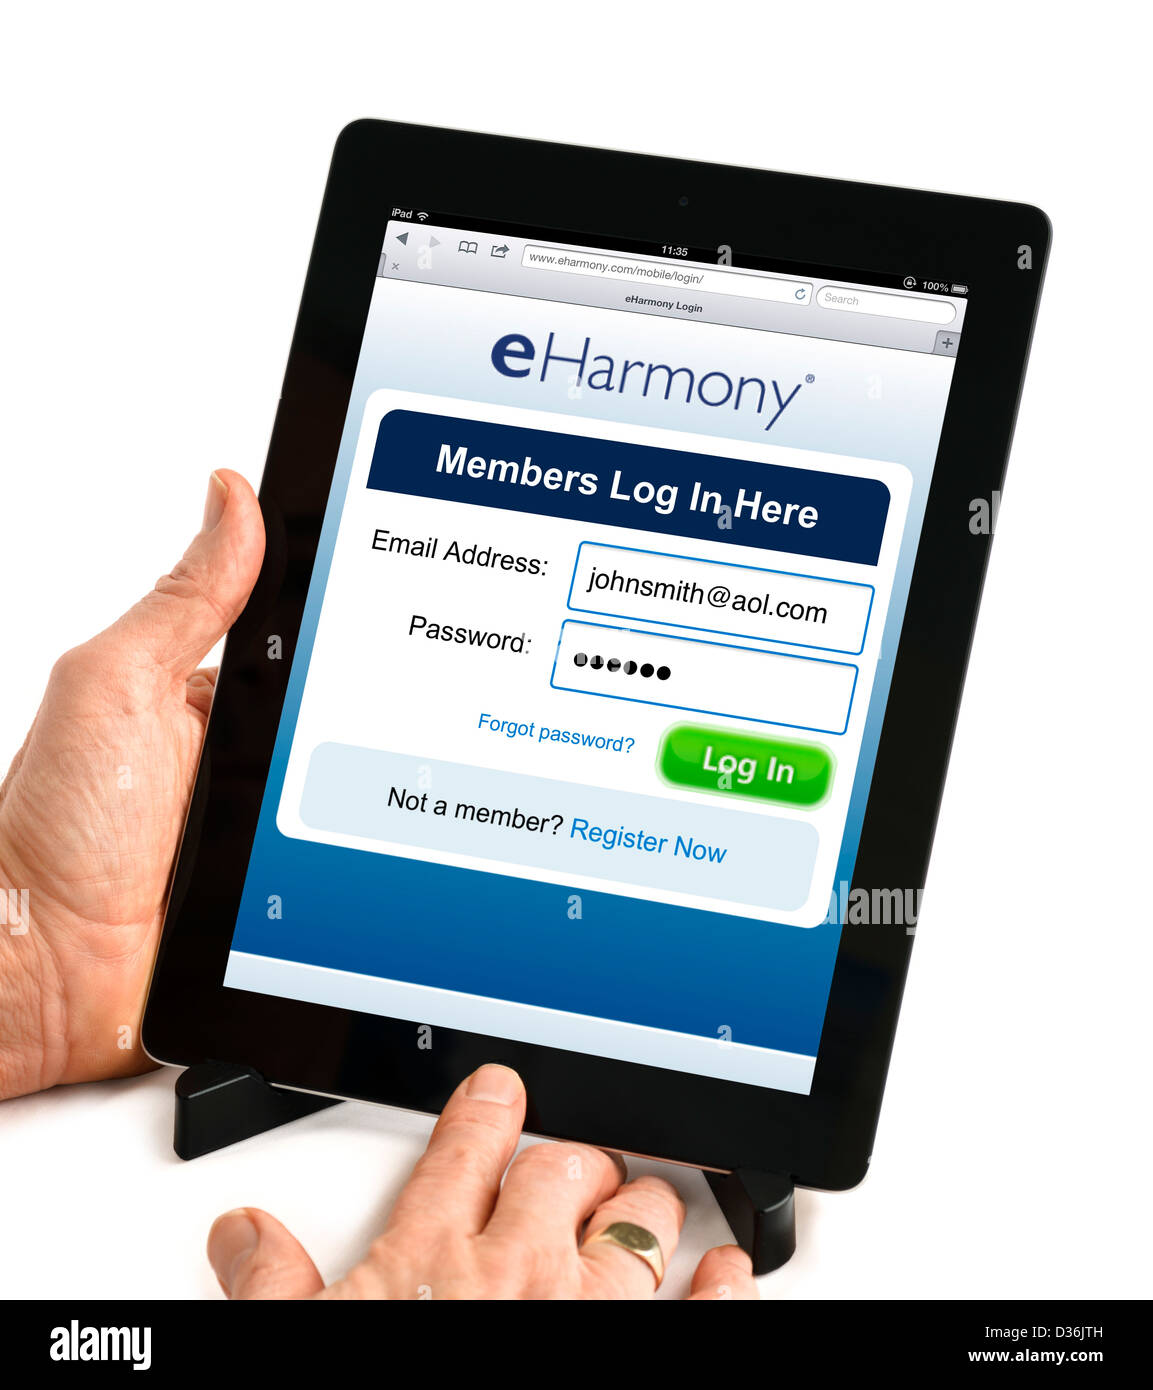 Log in screen of the online dating site eHarmony.com on a 4th generation Apple iPad, USA Stock Photo